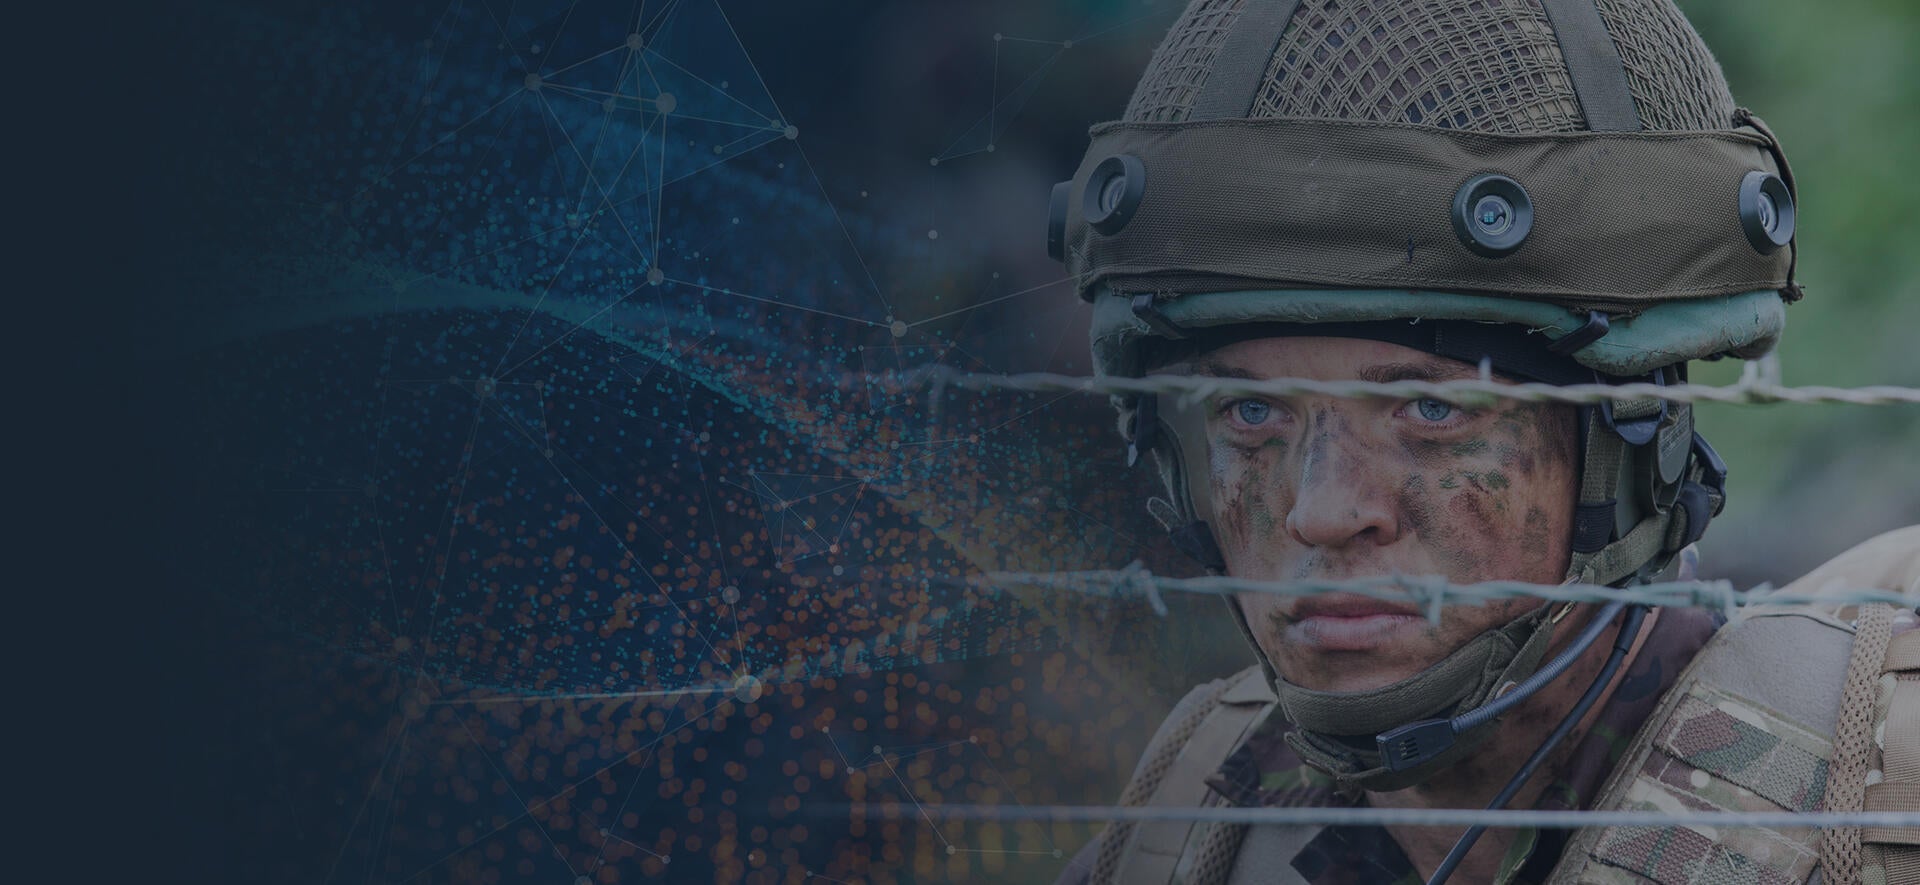 DSEI Event Page Header